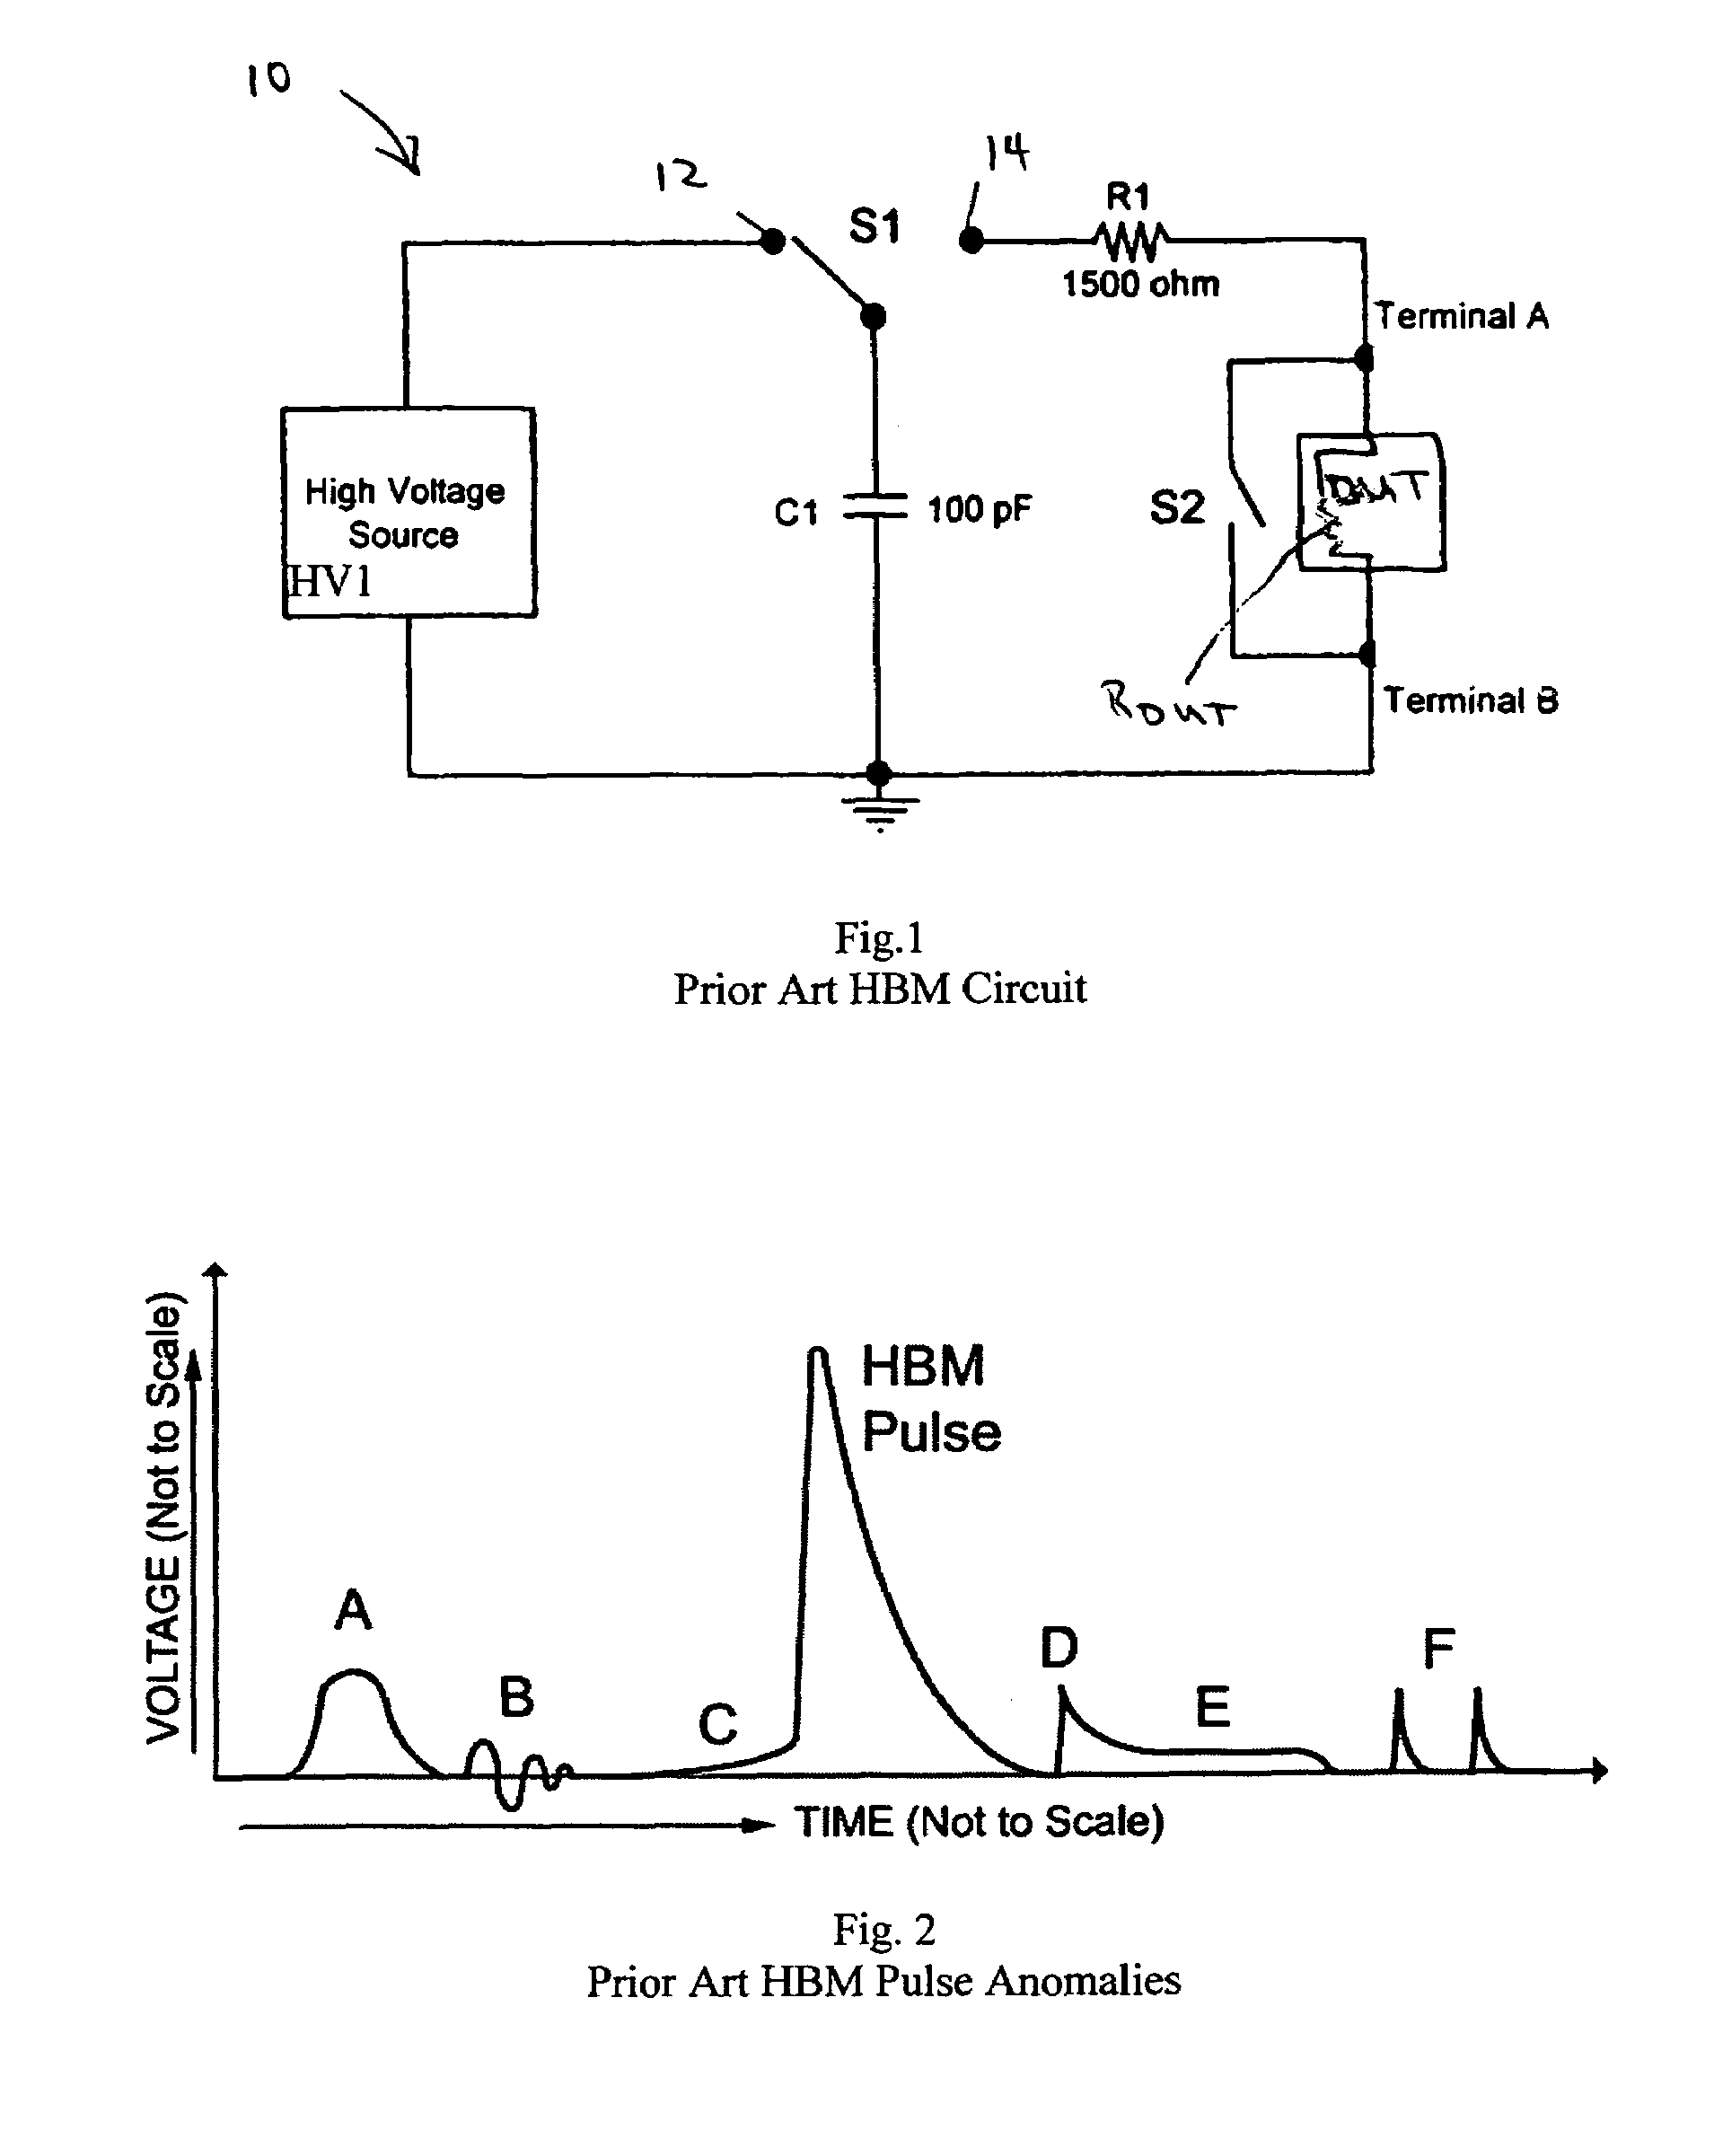 Circuit for minimizing or eliminating pulse anomalies in human body model electrostatic discharge tests